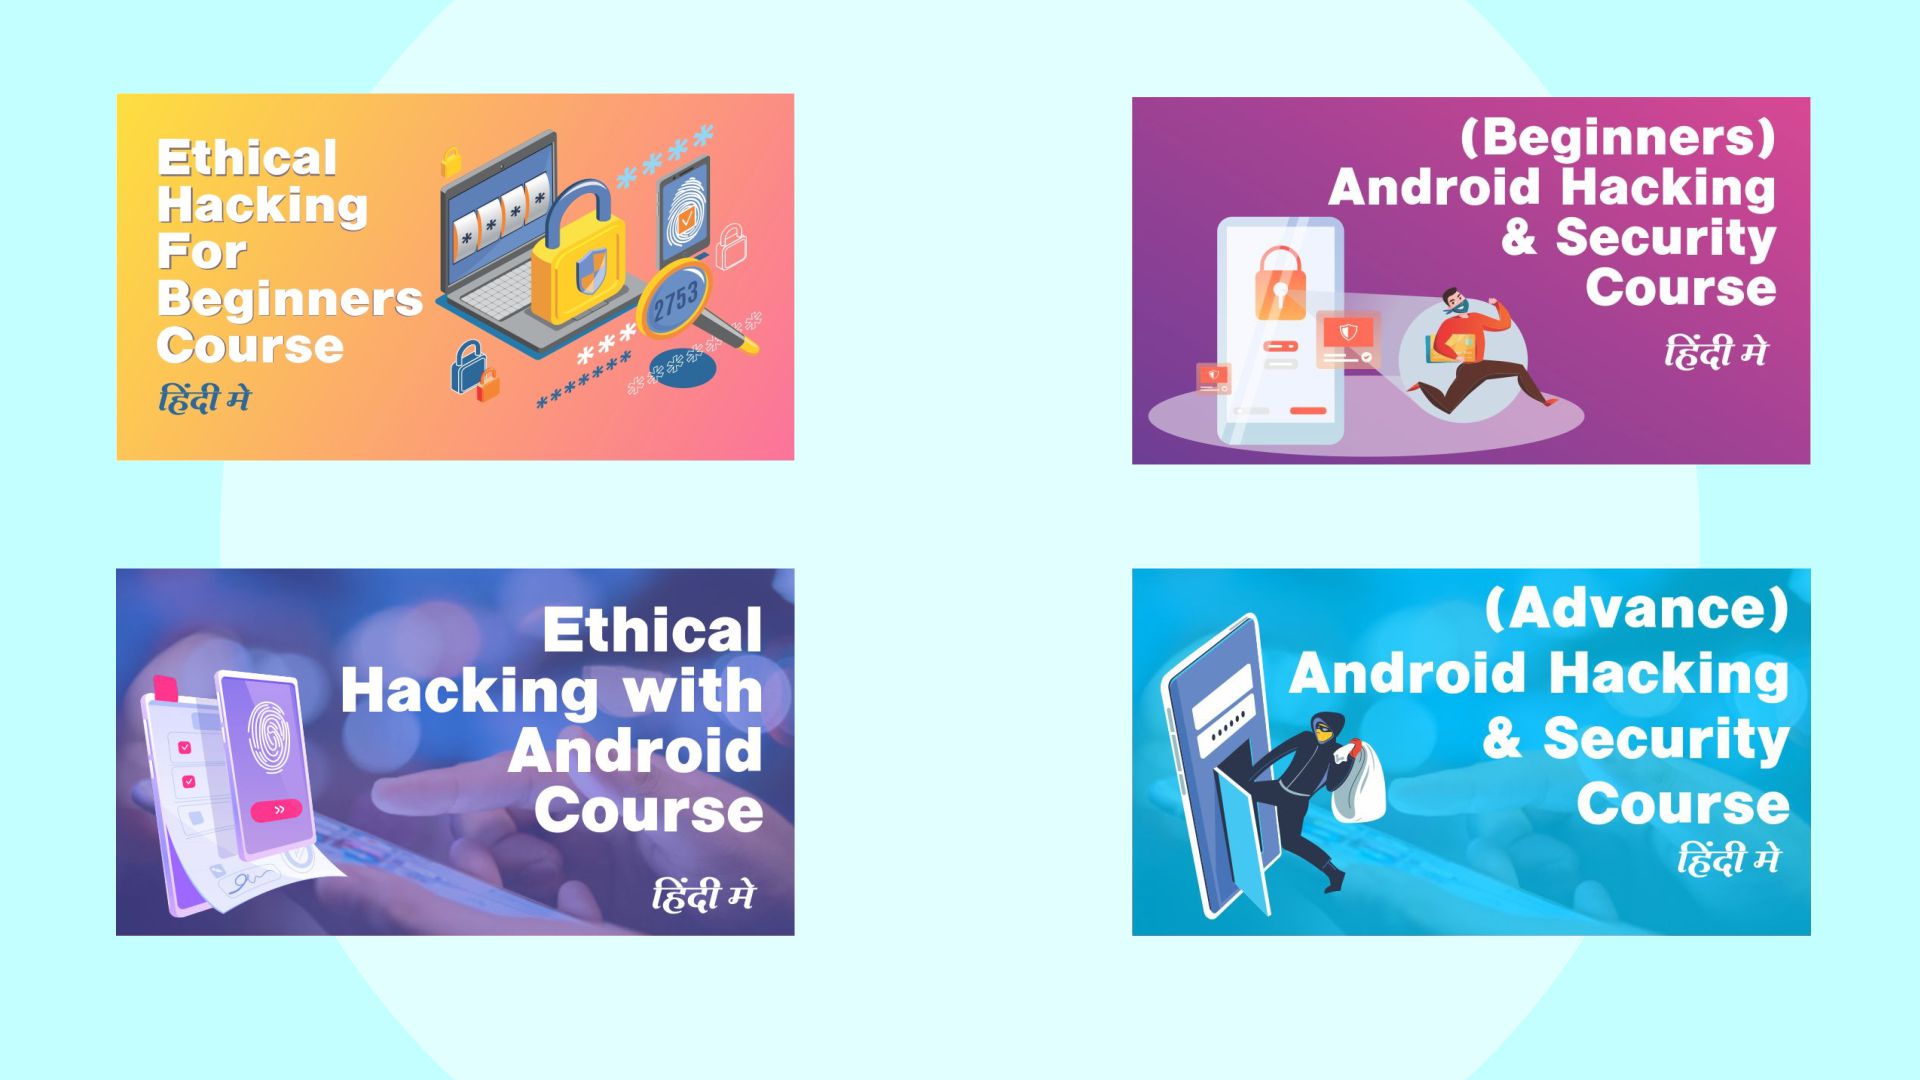 Hacking With Android + (Beginners) Android Hacking + (Advance) Android Hacking + Hacking for Beginners